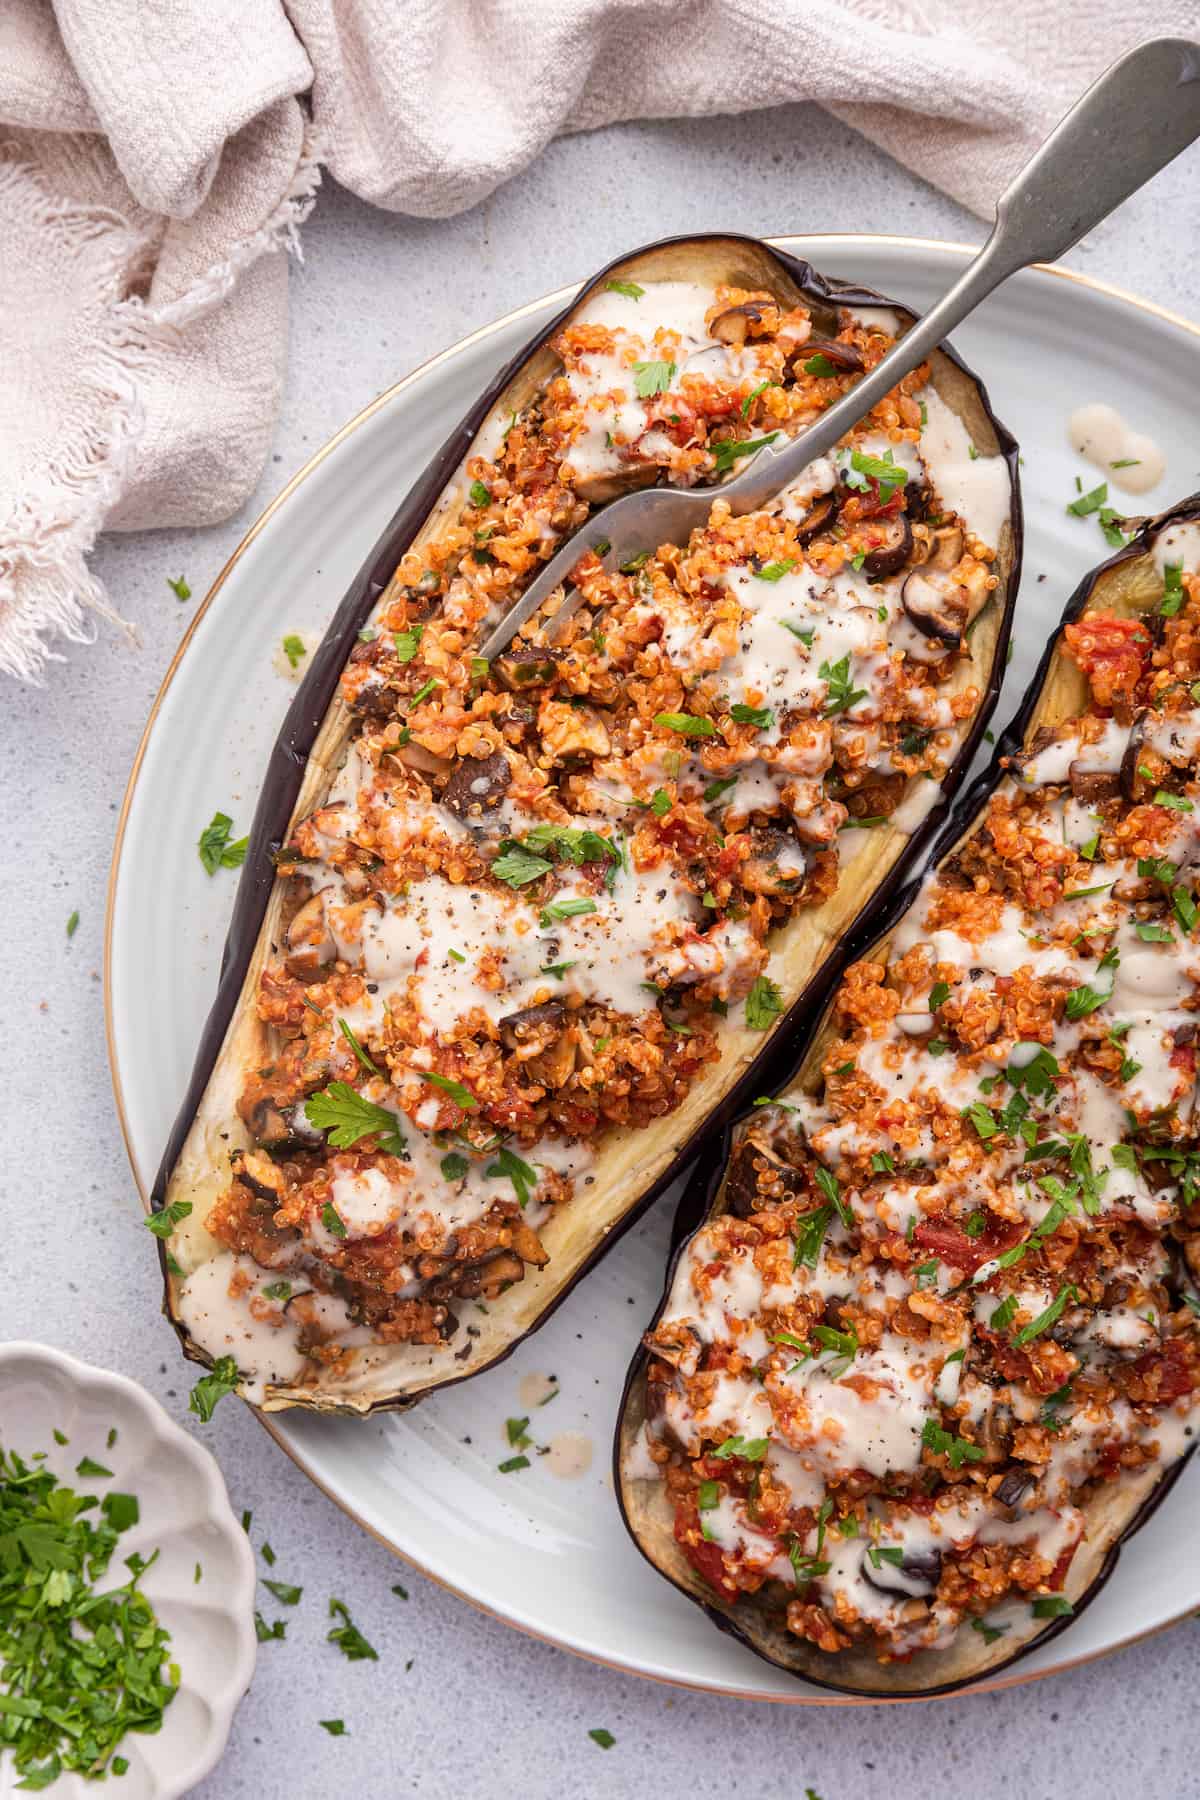 Overhead view of two stuffed eggplant halves on plate with fork